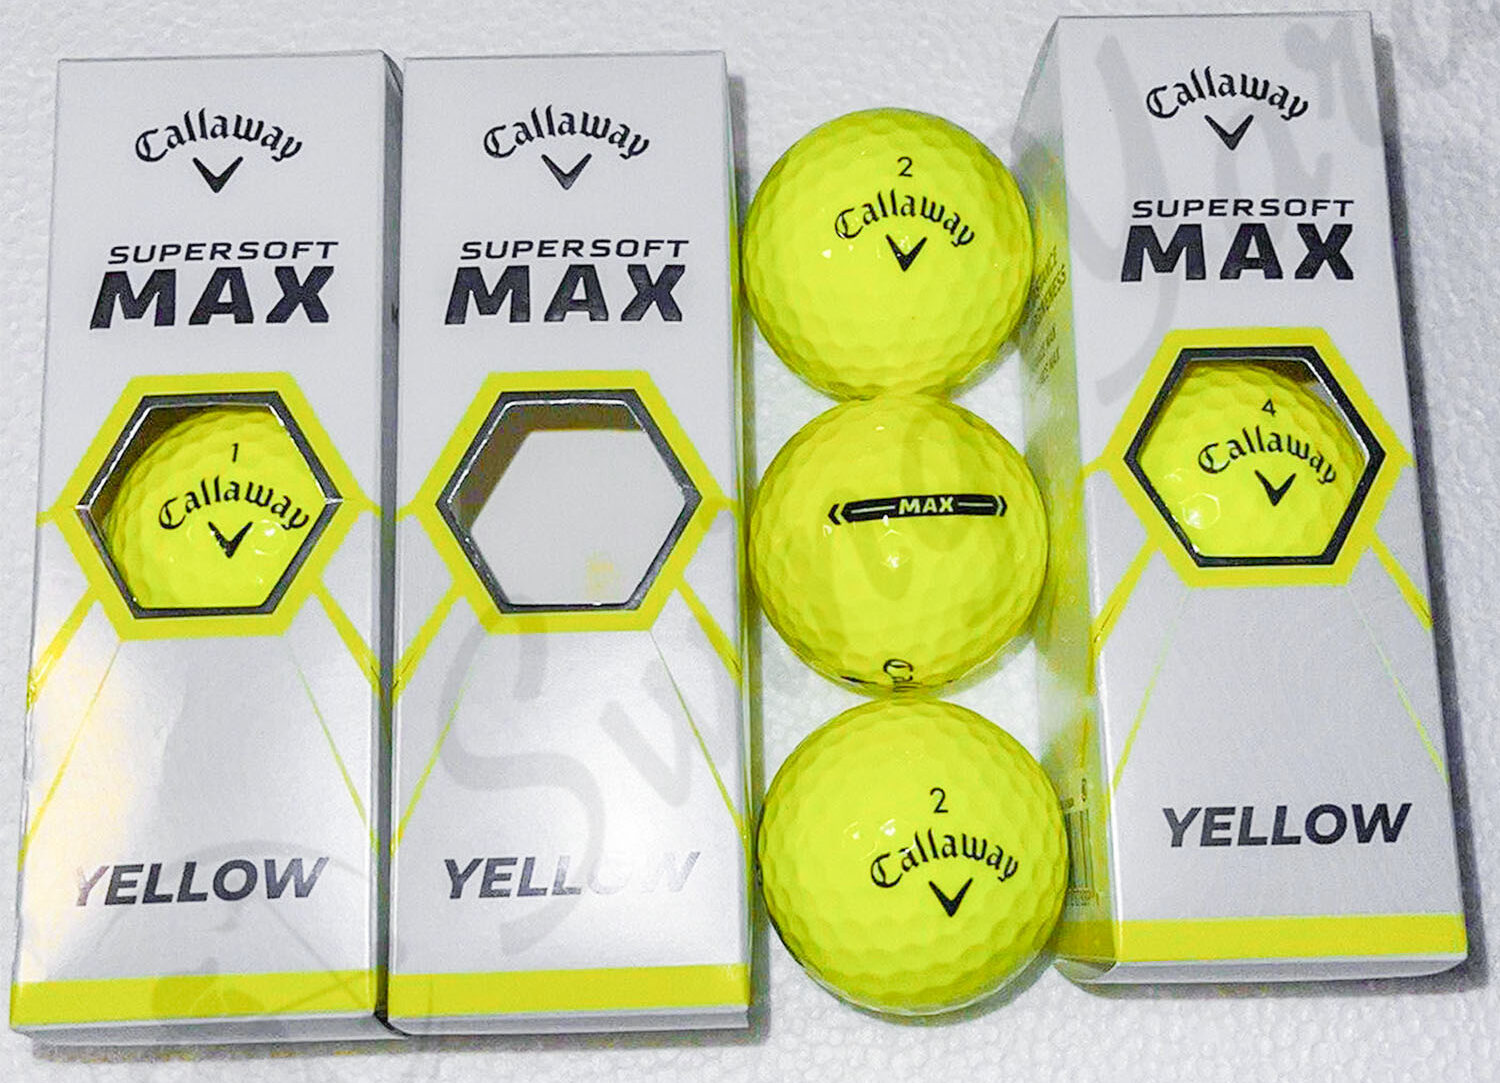 The Callaway Supersoft Max single packs and yellow balls at the table